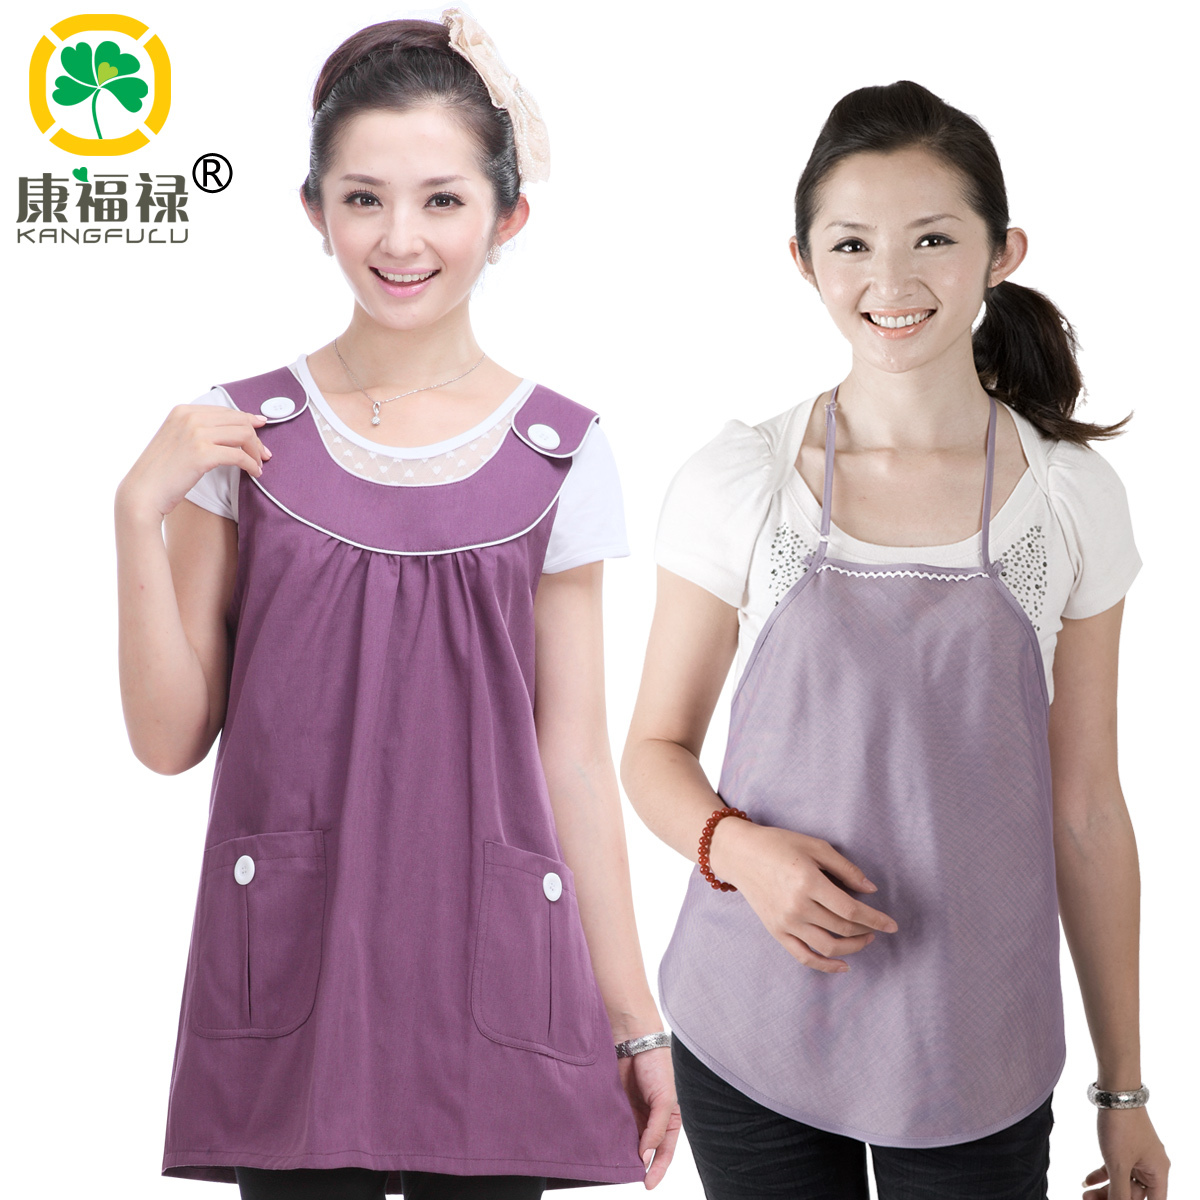 Double radiation-resistant maternity clothing radiation-resistant silver fiber radiation-resistant bellyached 804a